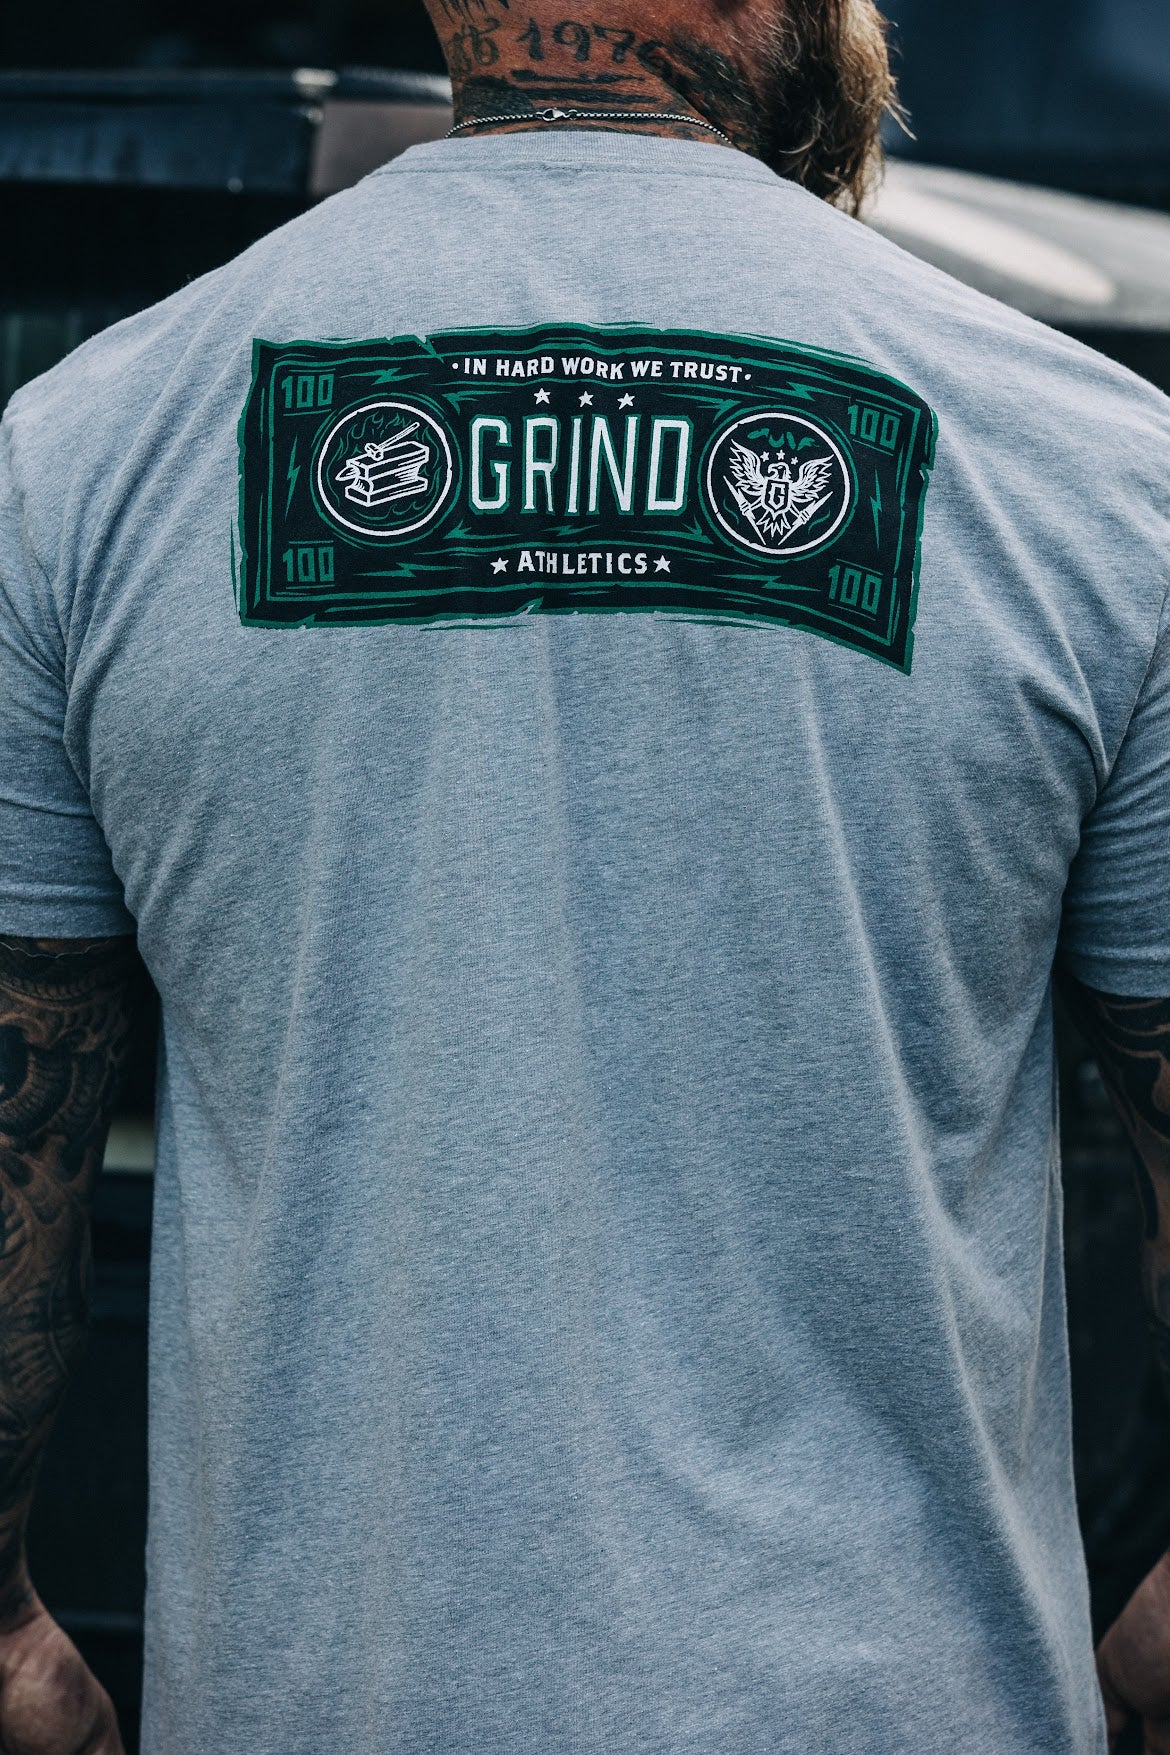 The Grind Athletics Graphic T-Shirt In GRIND We Trust